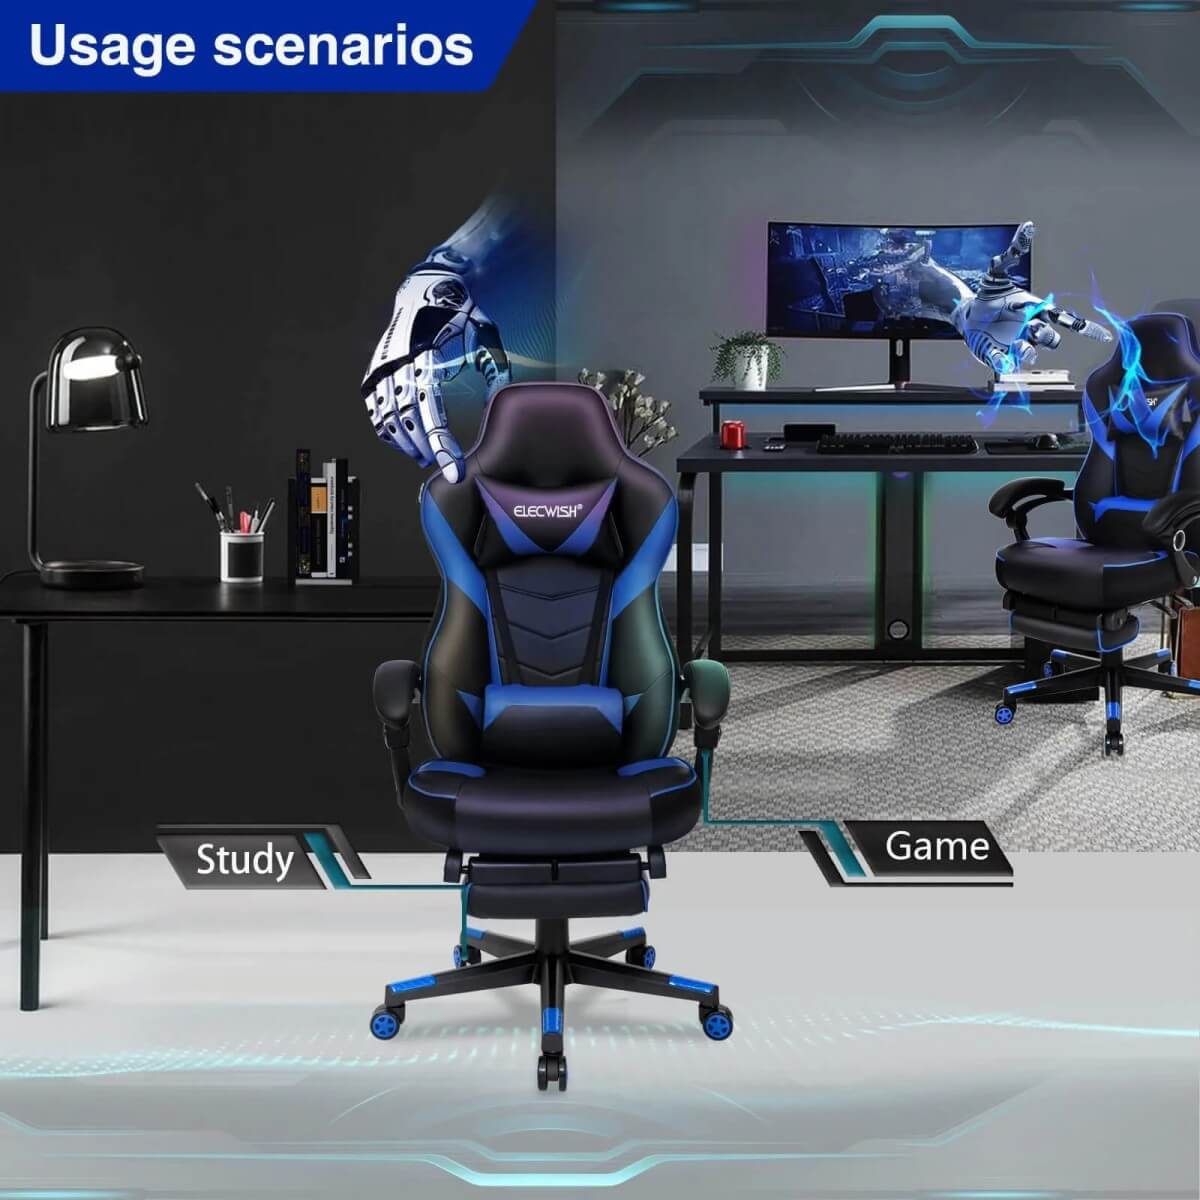 Usage scenaries Elecwish Video Game Chairs Blue Gaming Chair With Footrest OC087